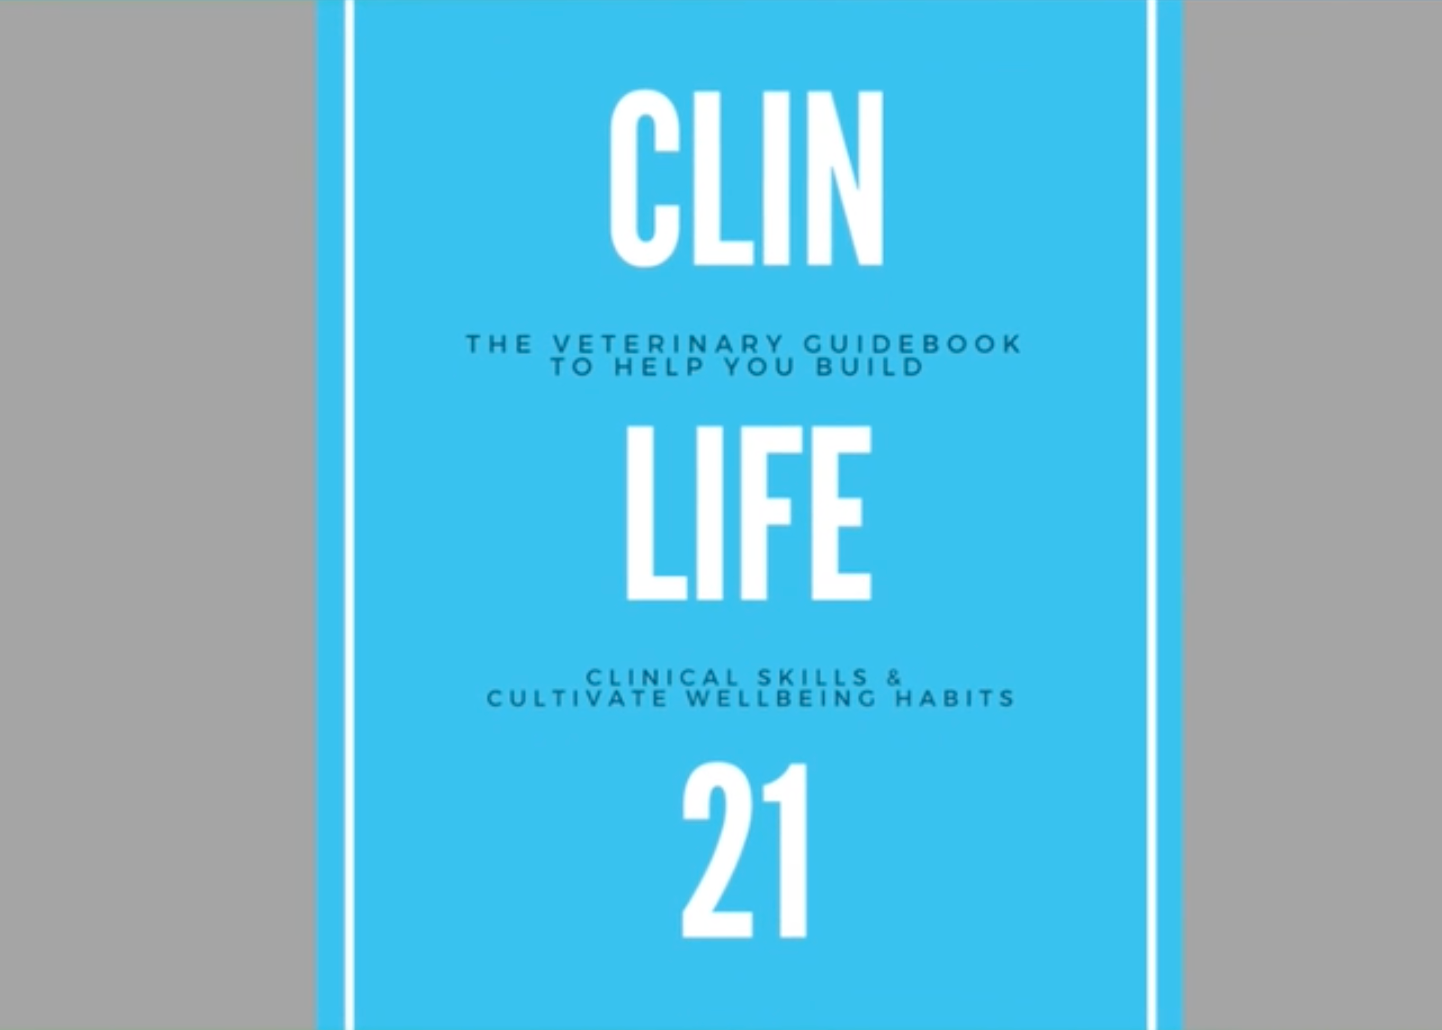 Wellbeing Checkup: Meet the Authors behind "ClinLife-21"